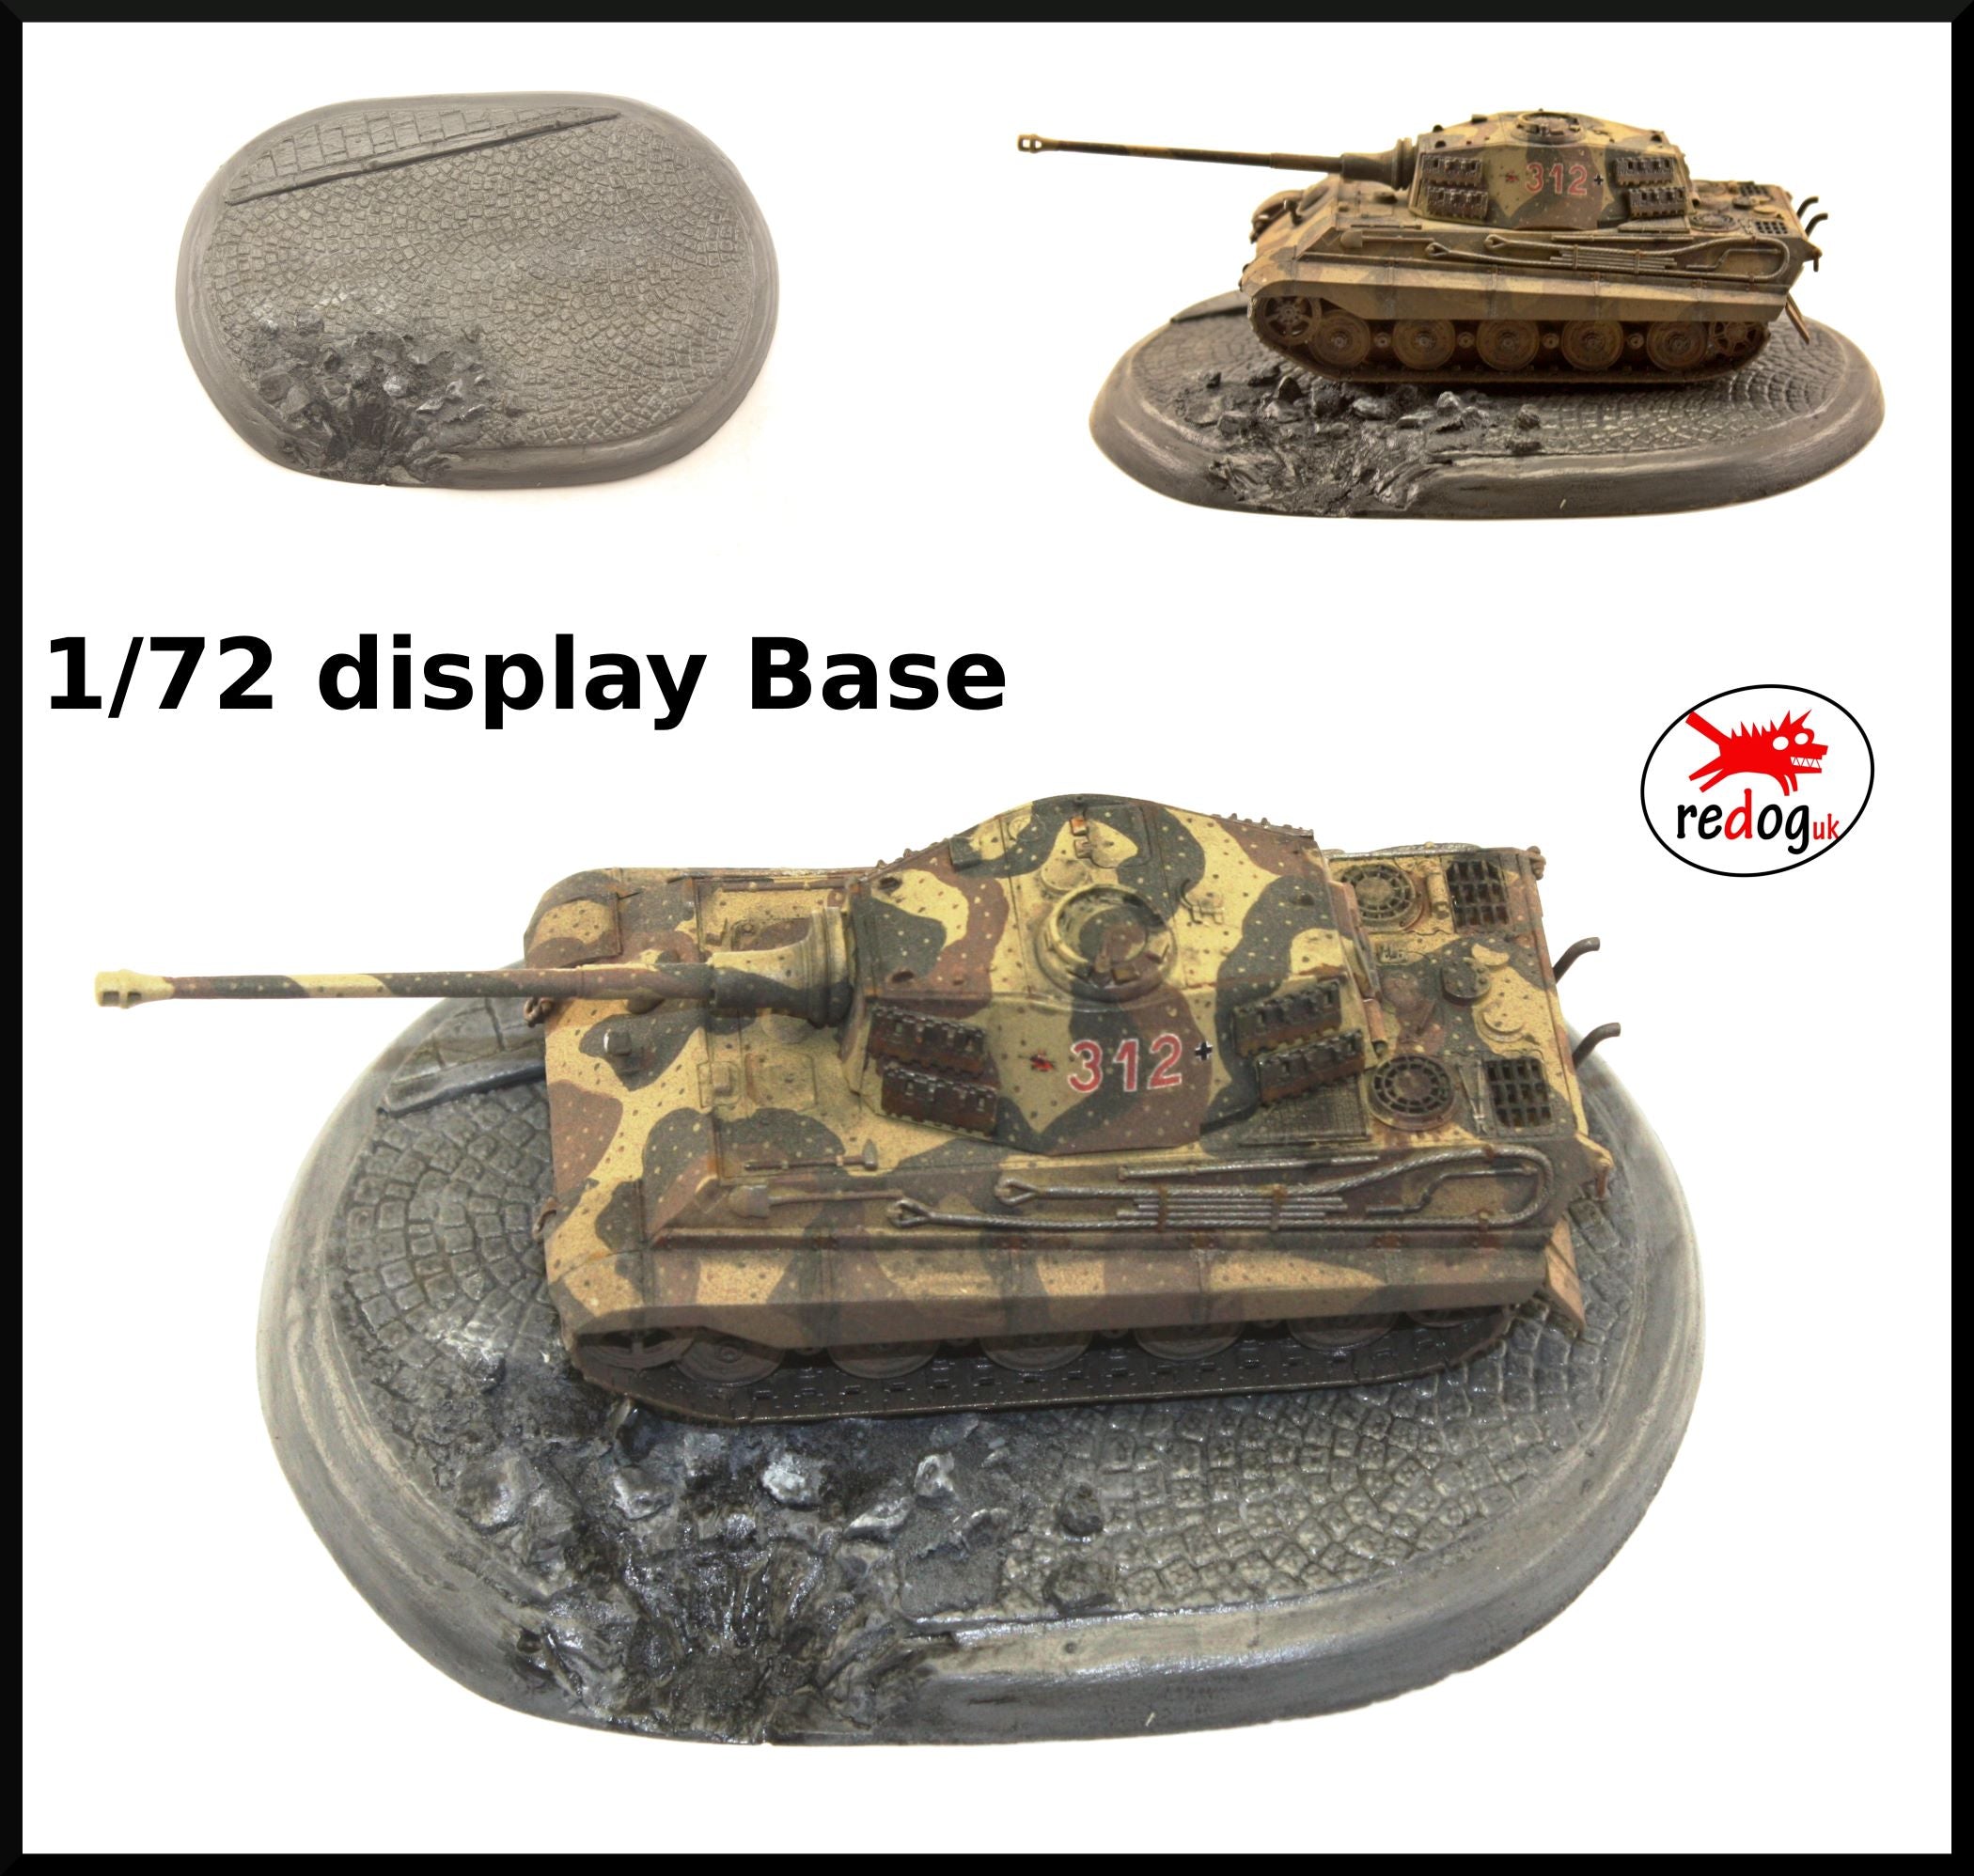 1:72 Smart Oval Diorama Display Base for Scale Model Tanks & Military Vehicles  D5